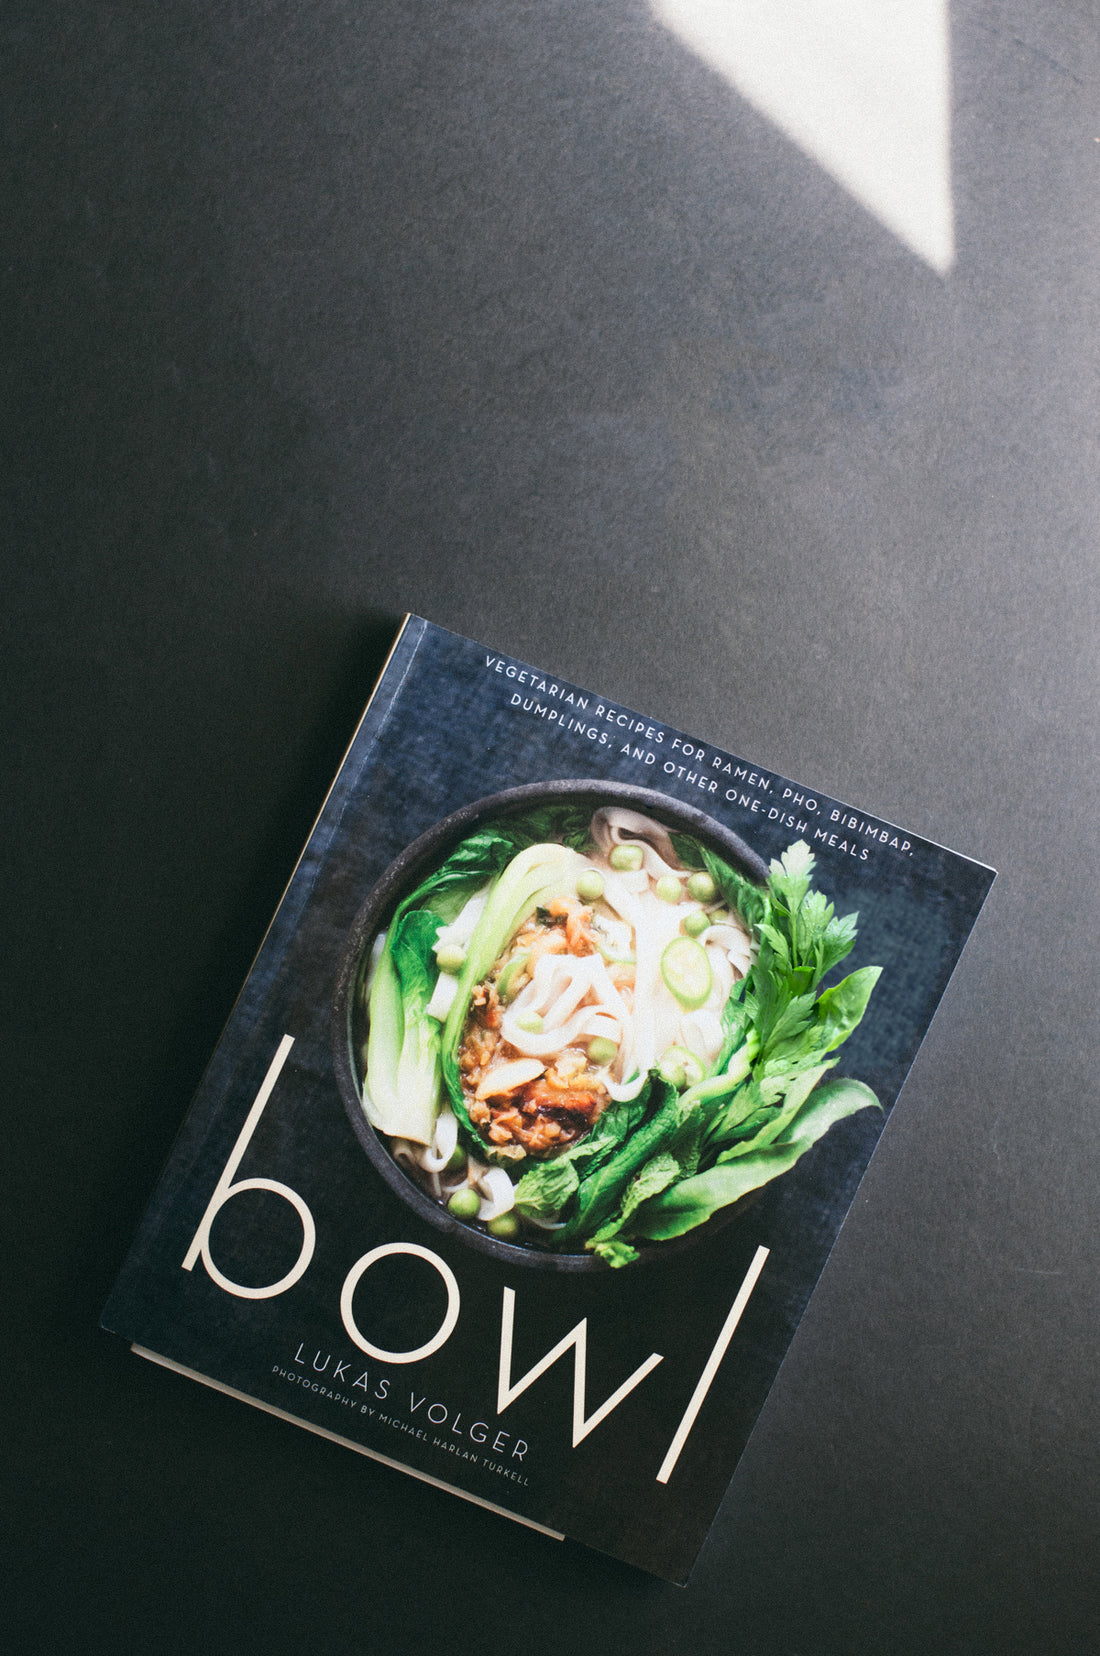 Book Review: Bowl by Lukas Volger